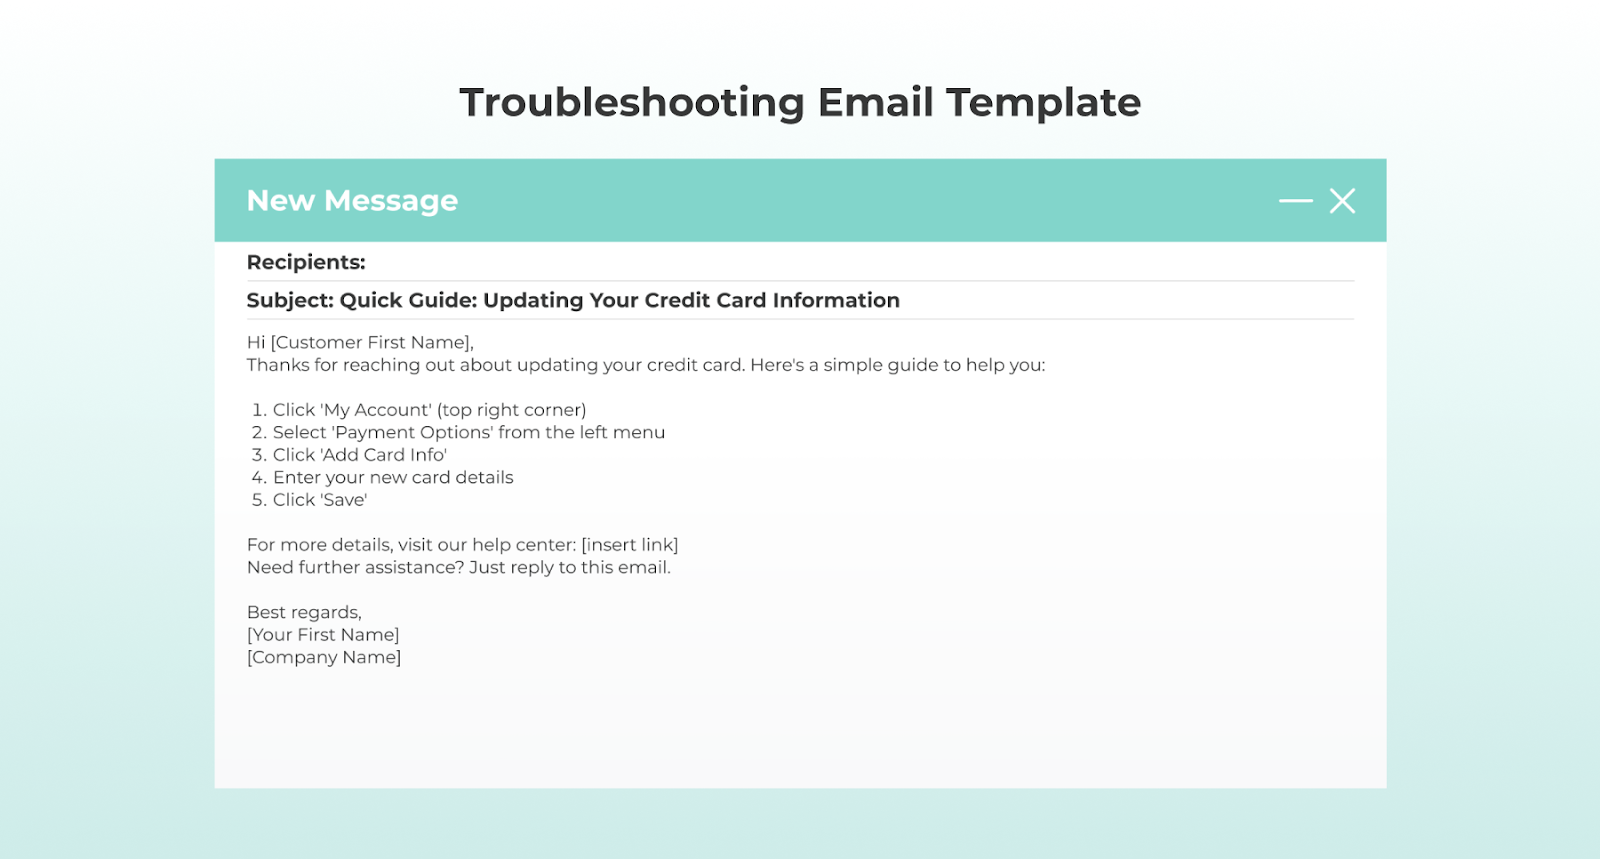 Customer Support Emails: Troubleshooting Email Template